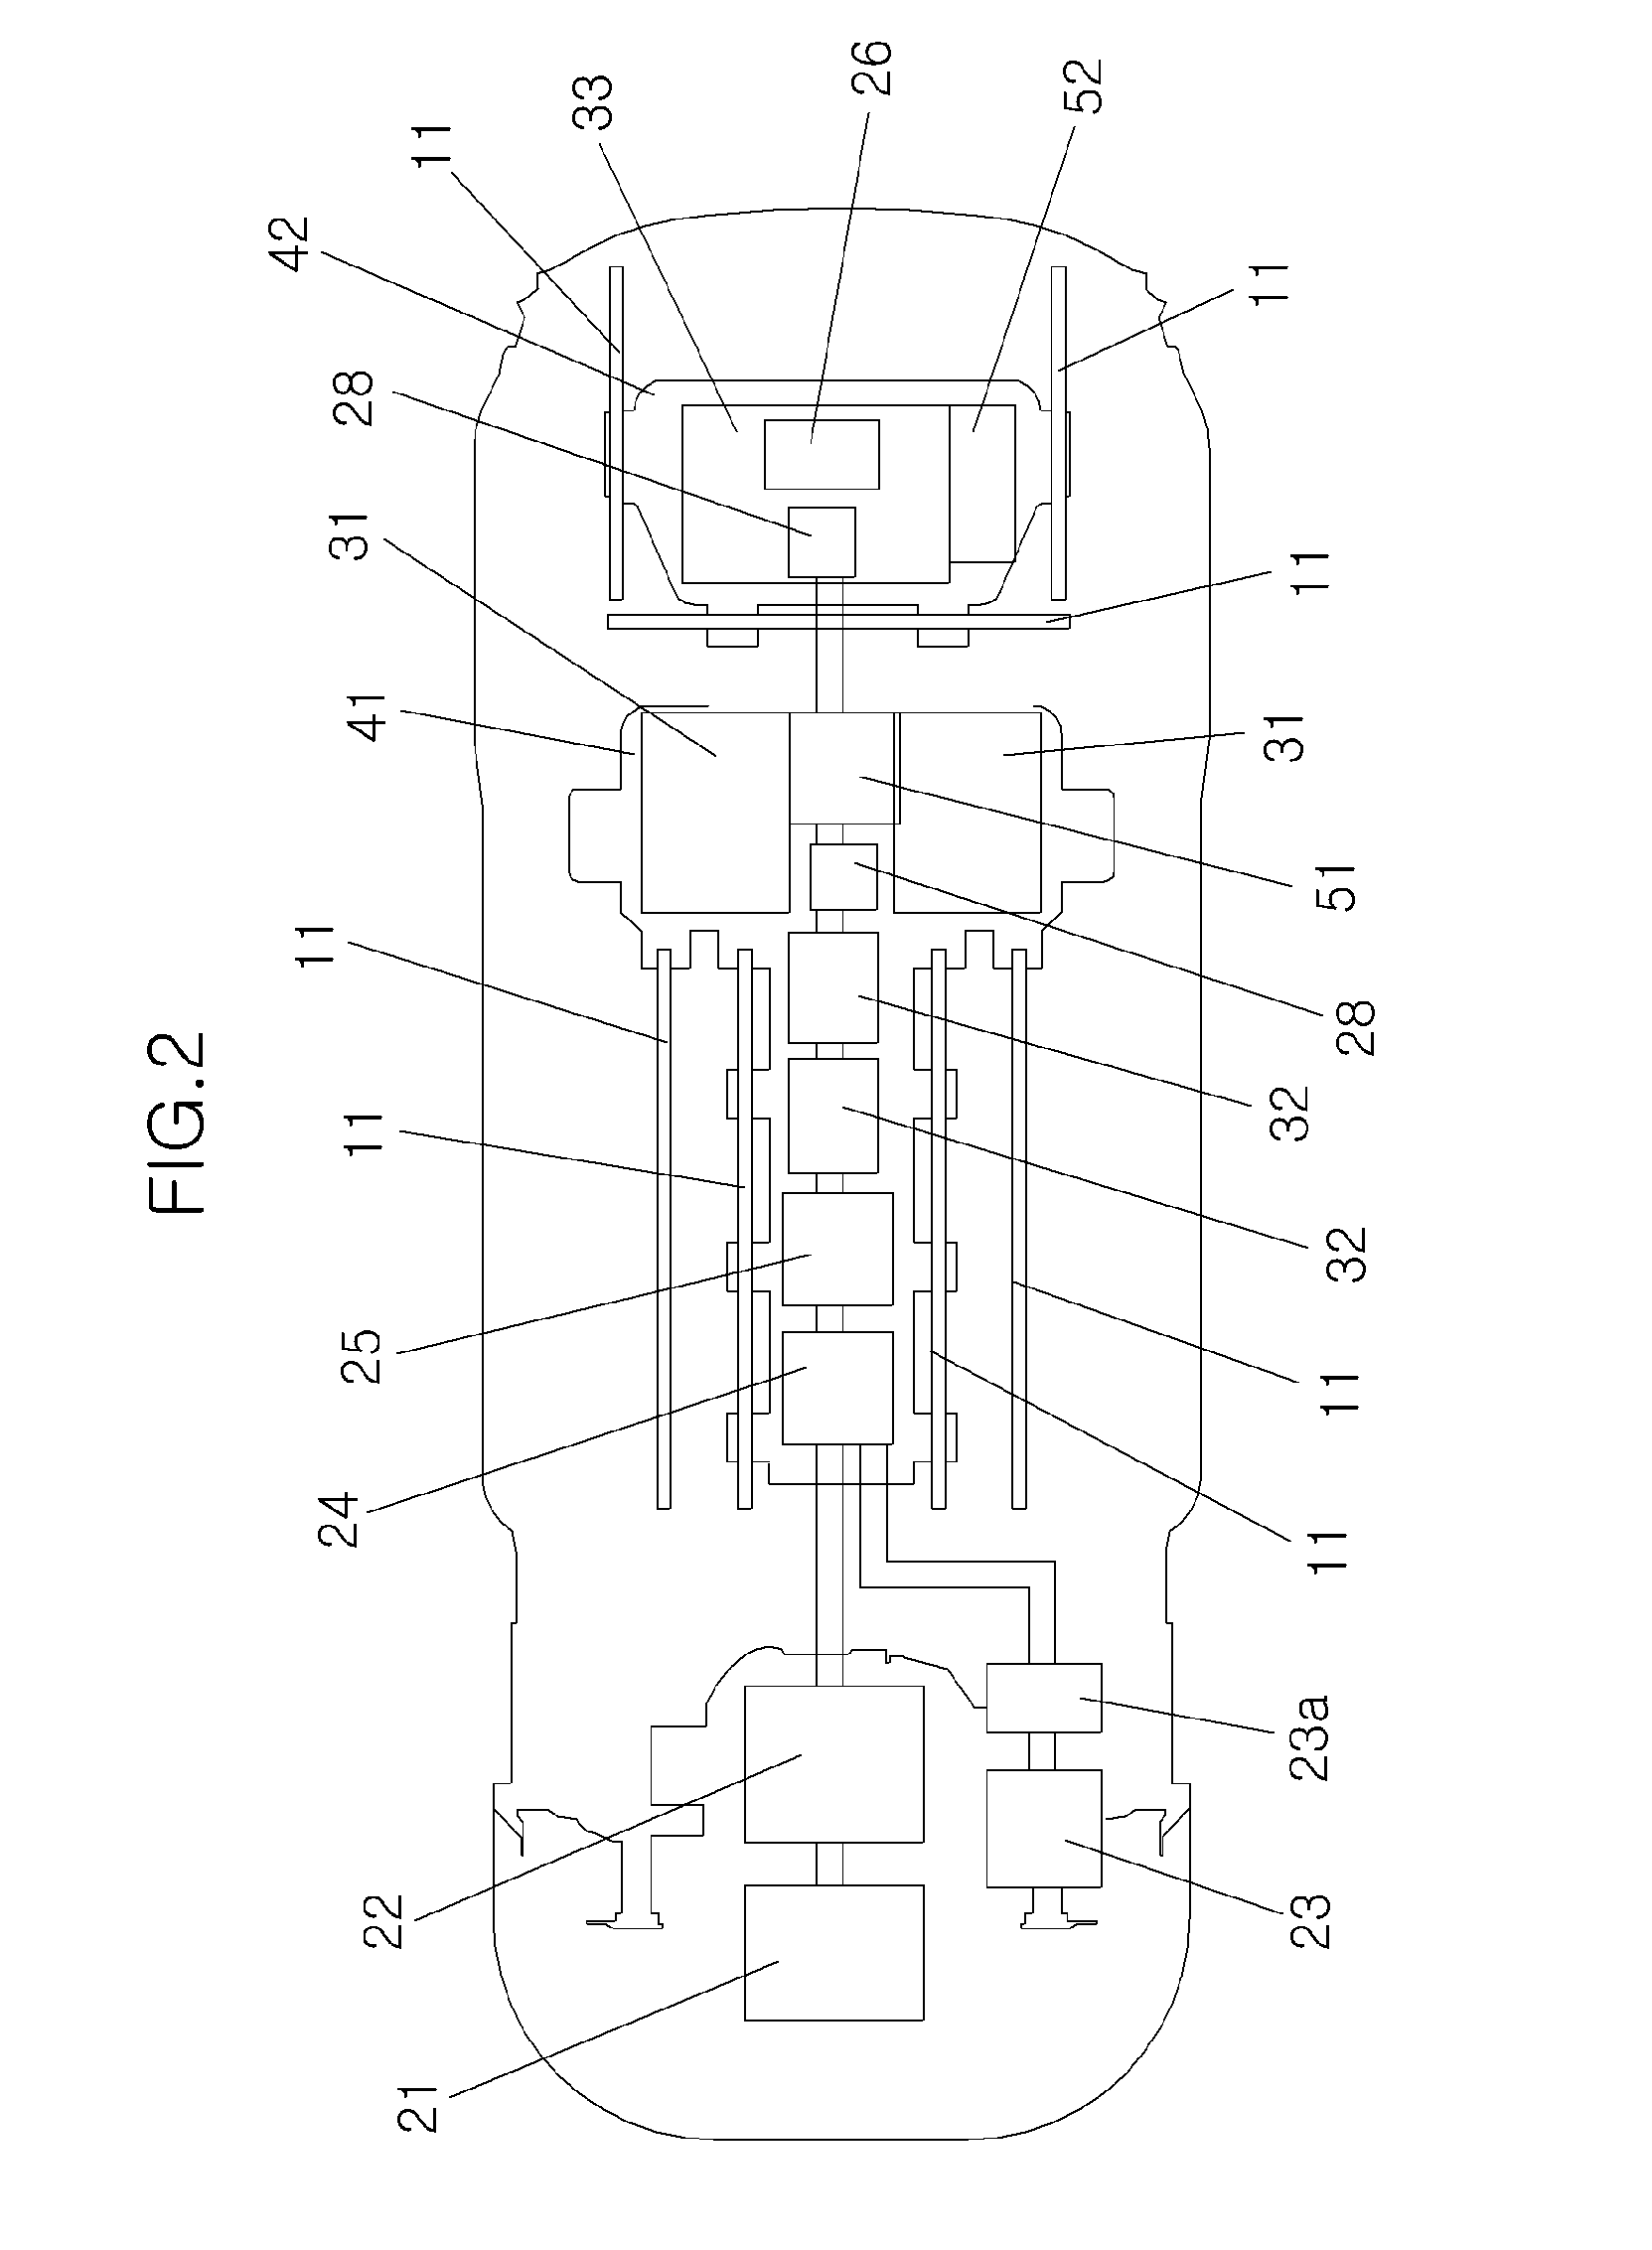 Mounting structure for battery in electric vehicle